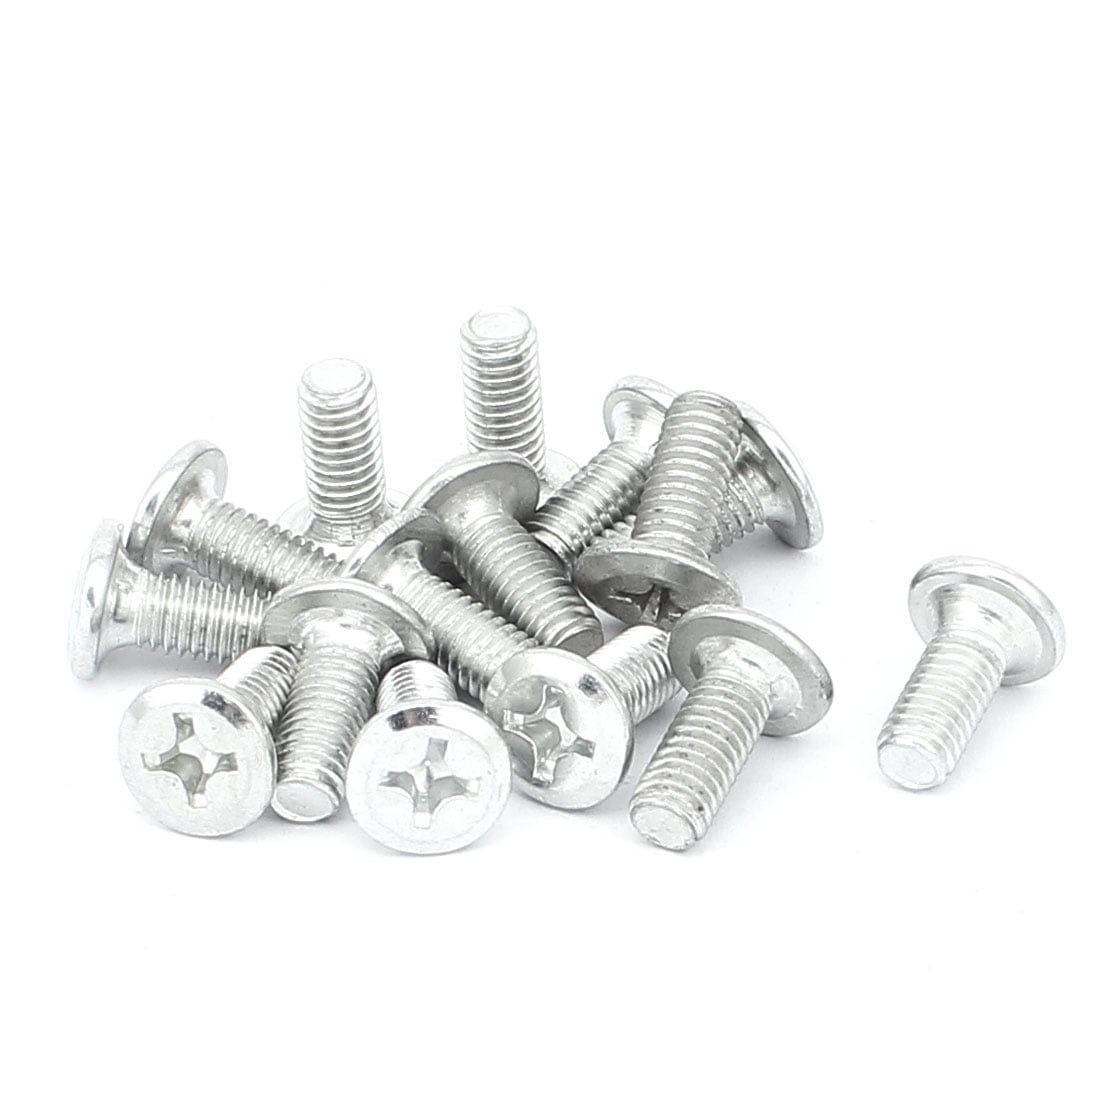 countersunk slot bolt bolts screw Machine screws with nuts M6 x 40 pack of 10